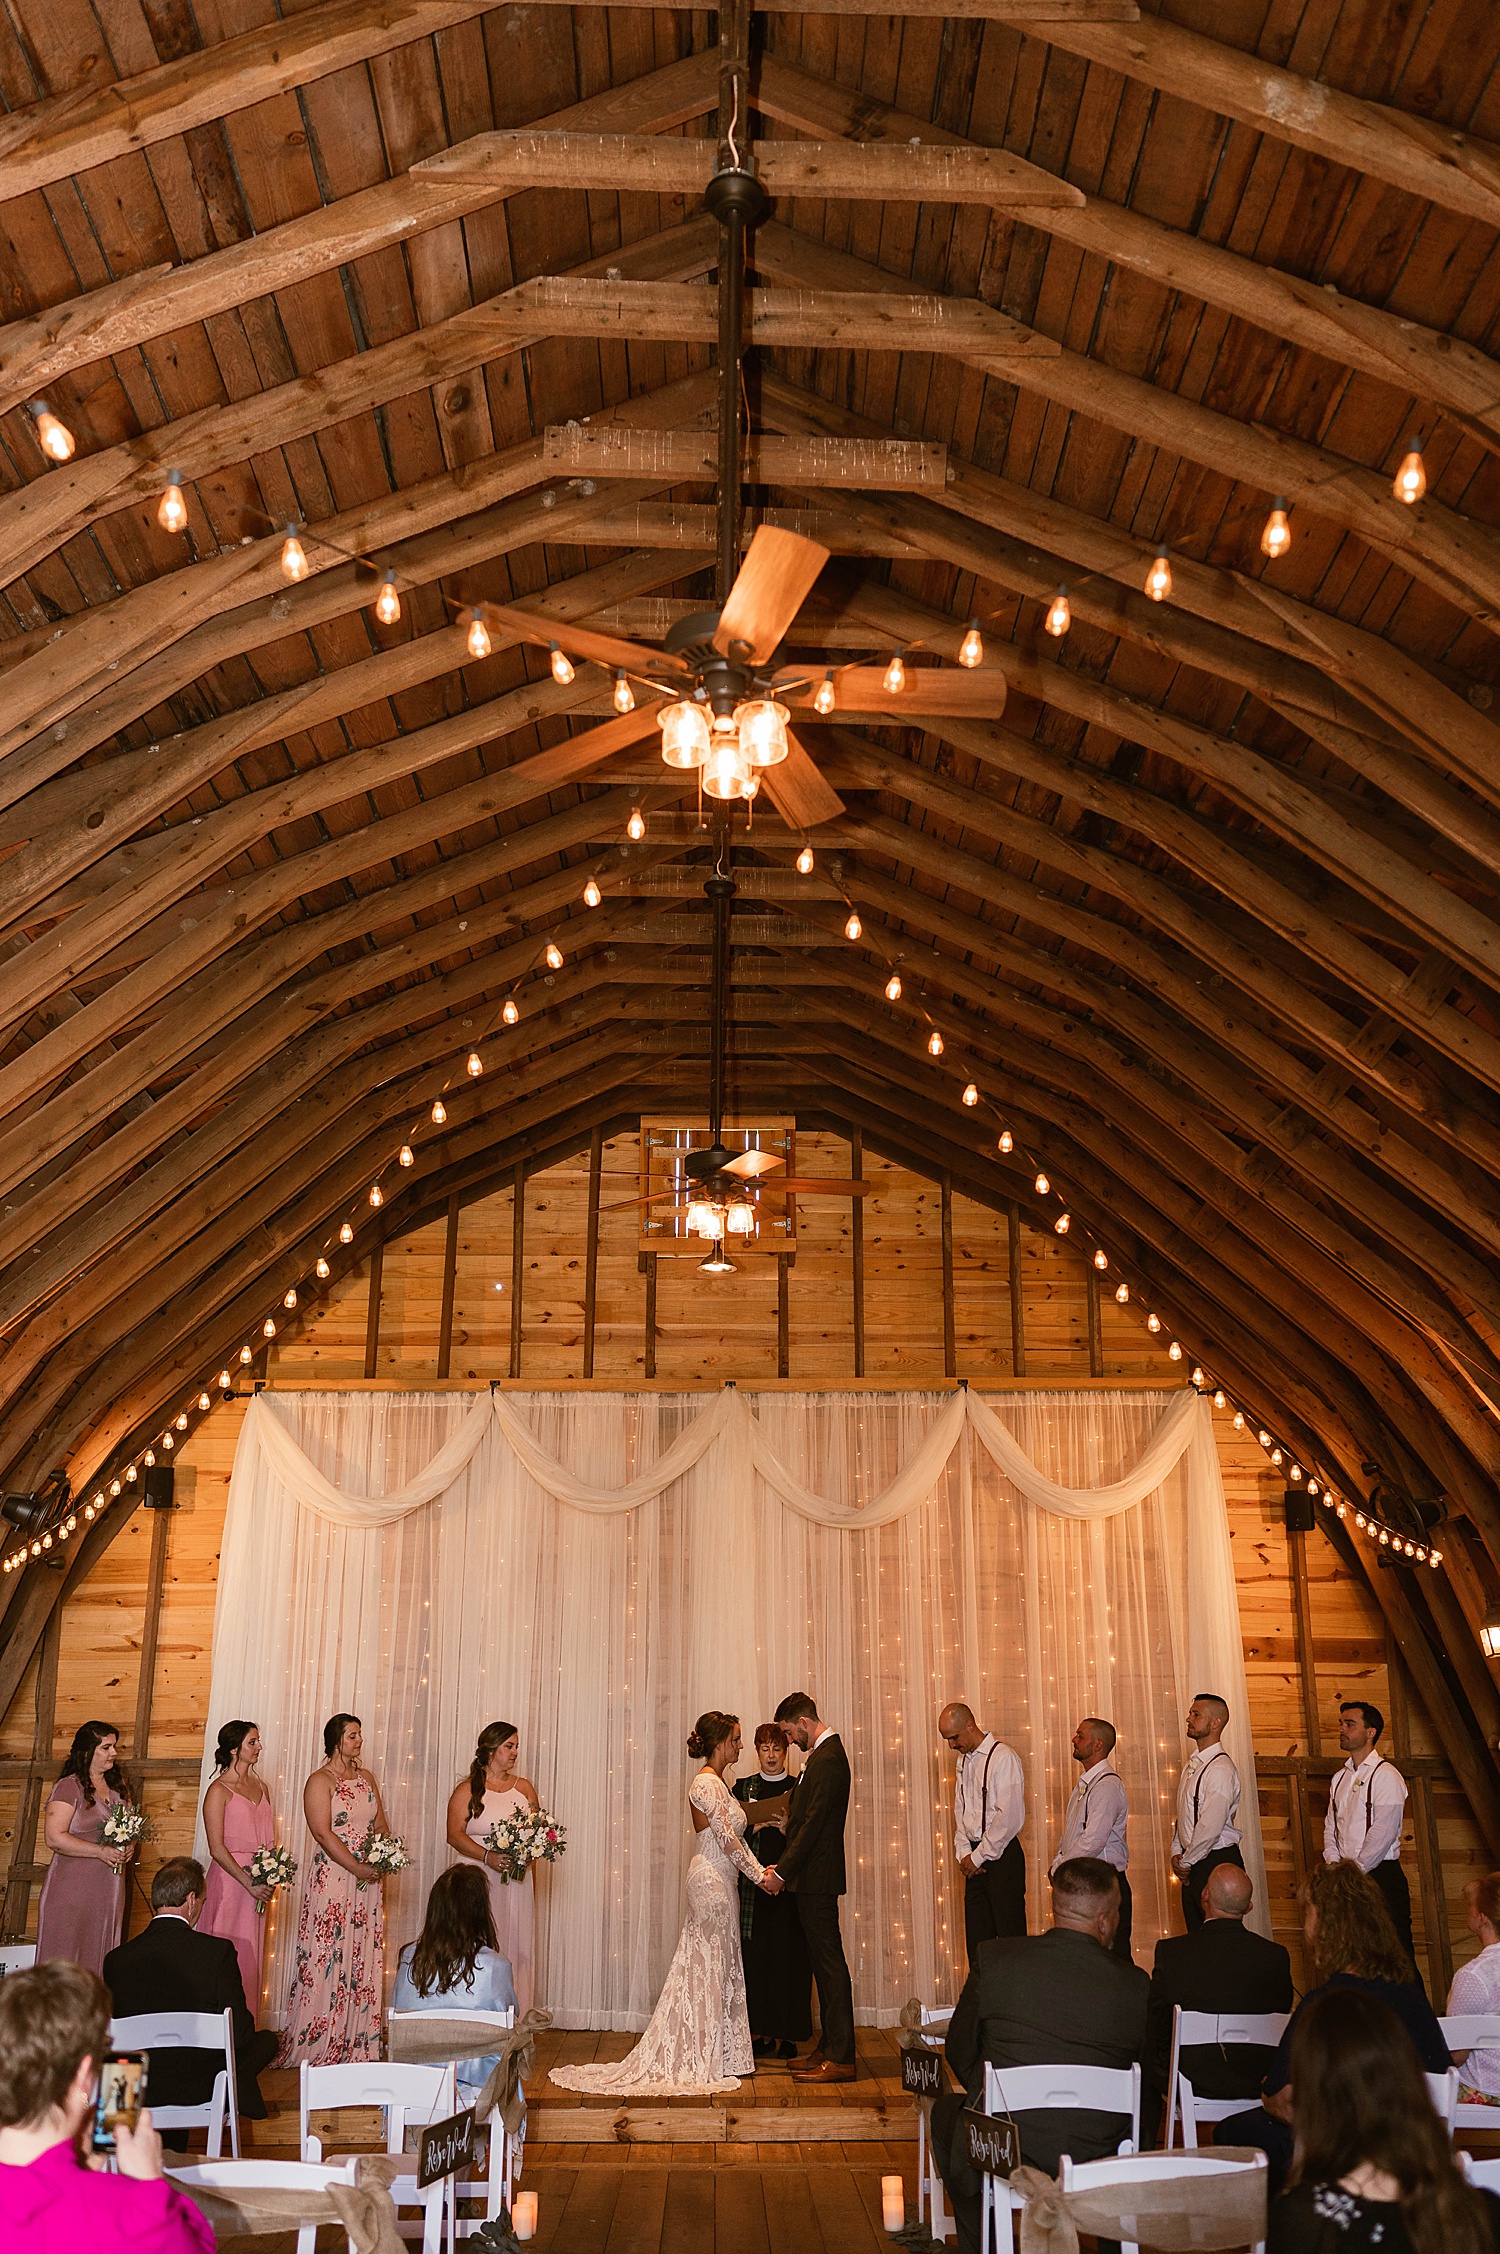 Barnstyle ceremony with pink and gray colors by Hannah Louise Photo